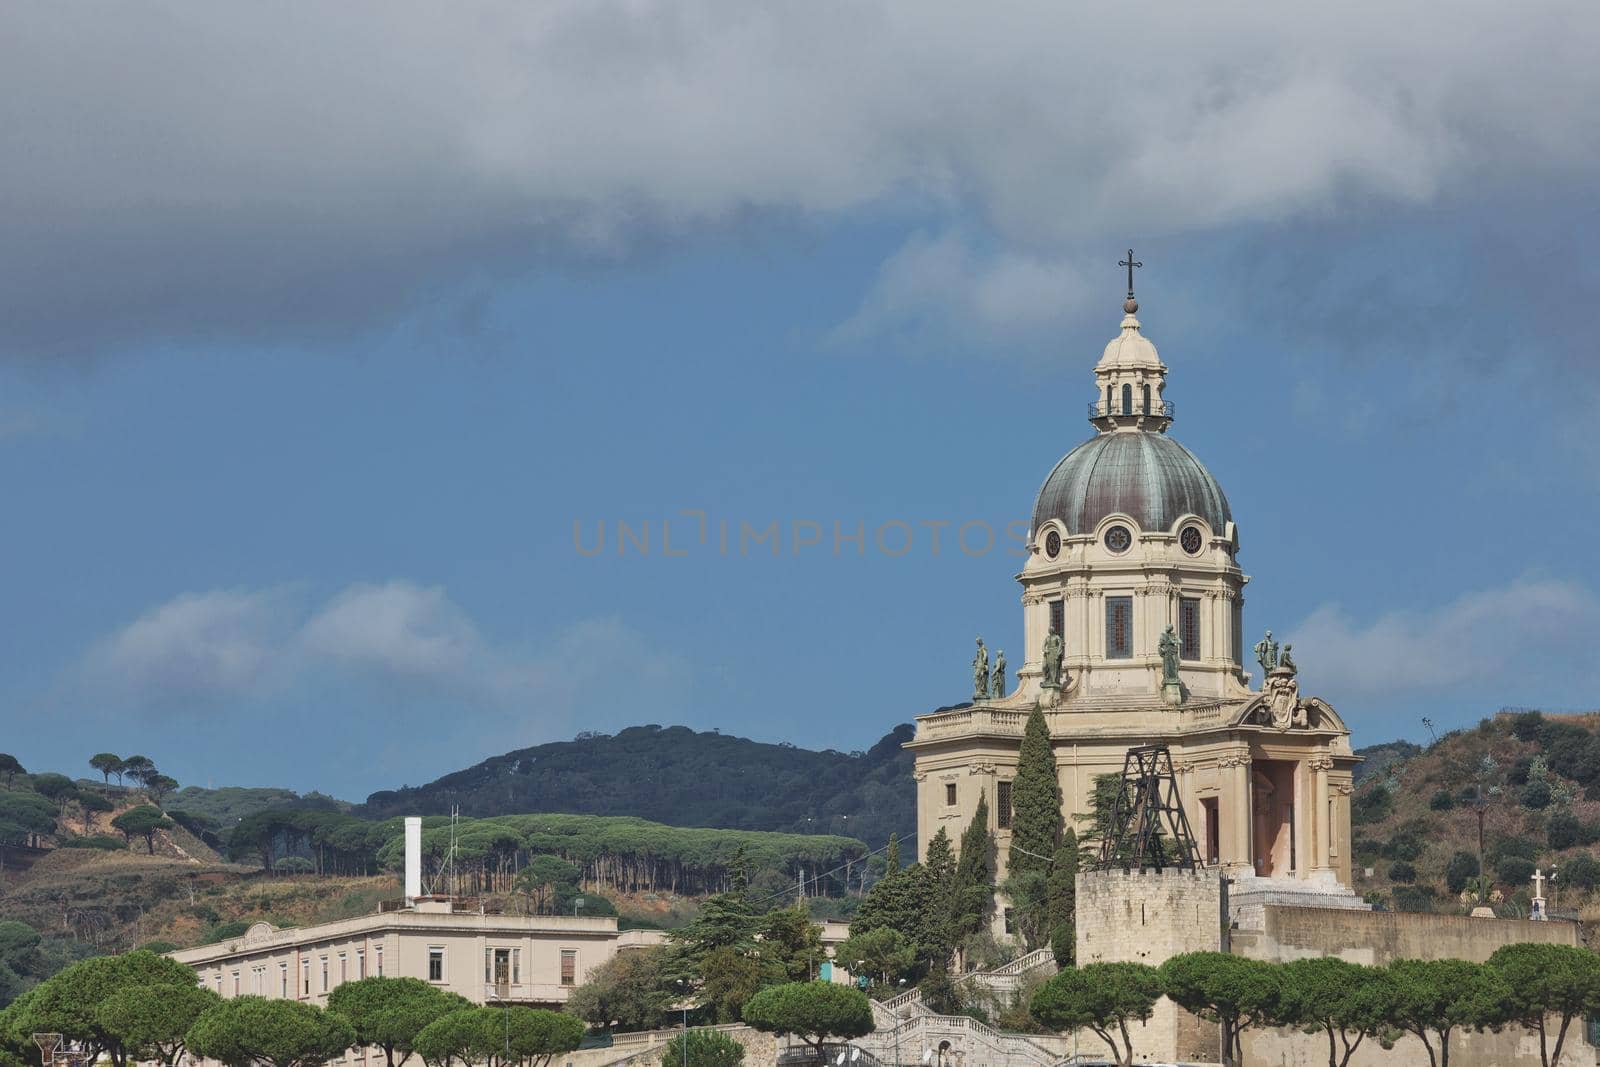 The dome of Church of King (Cristo Re) overlooking the city of Messina in Italy during summer. Beautiful photo of the landmark in Sicily.